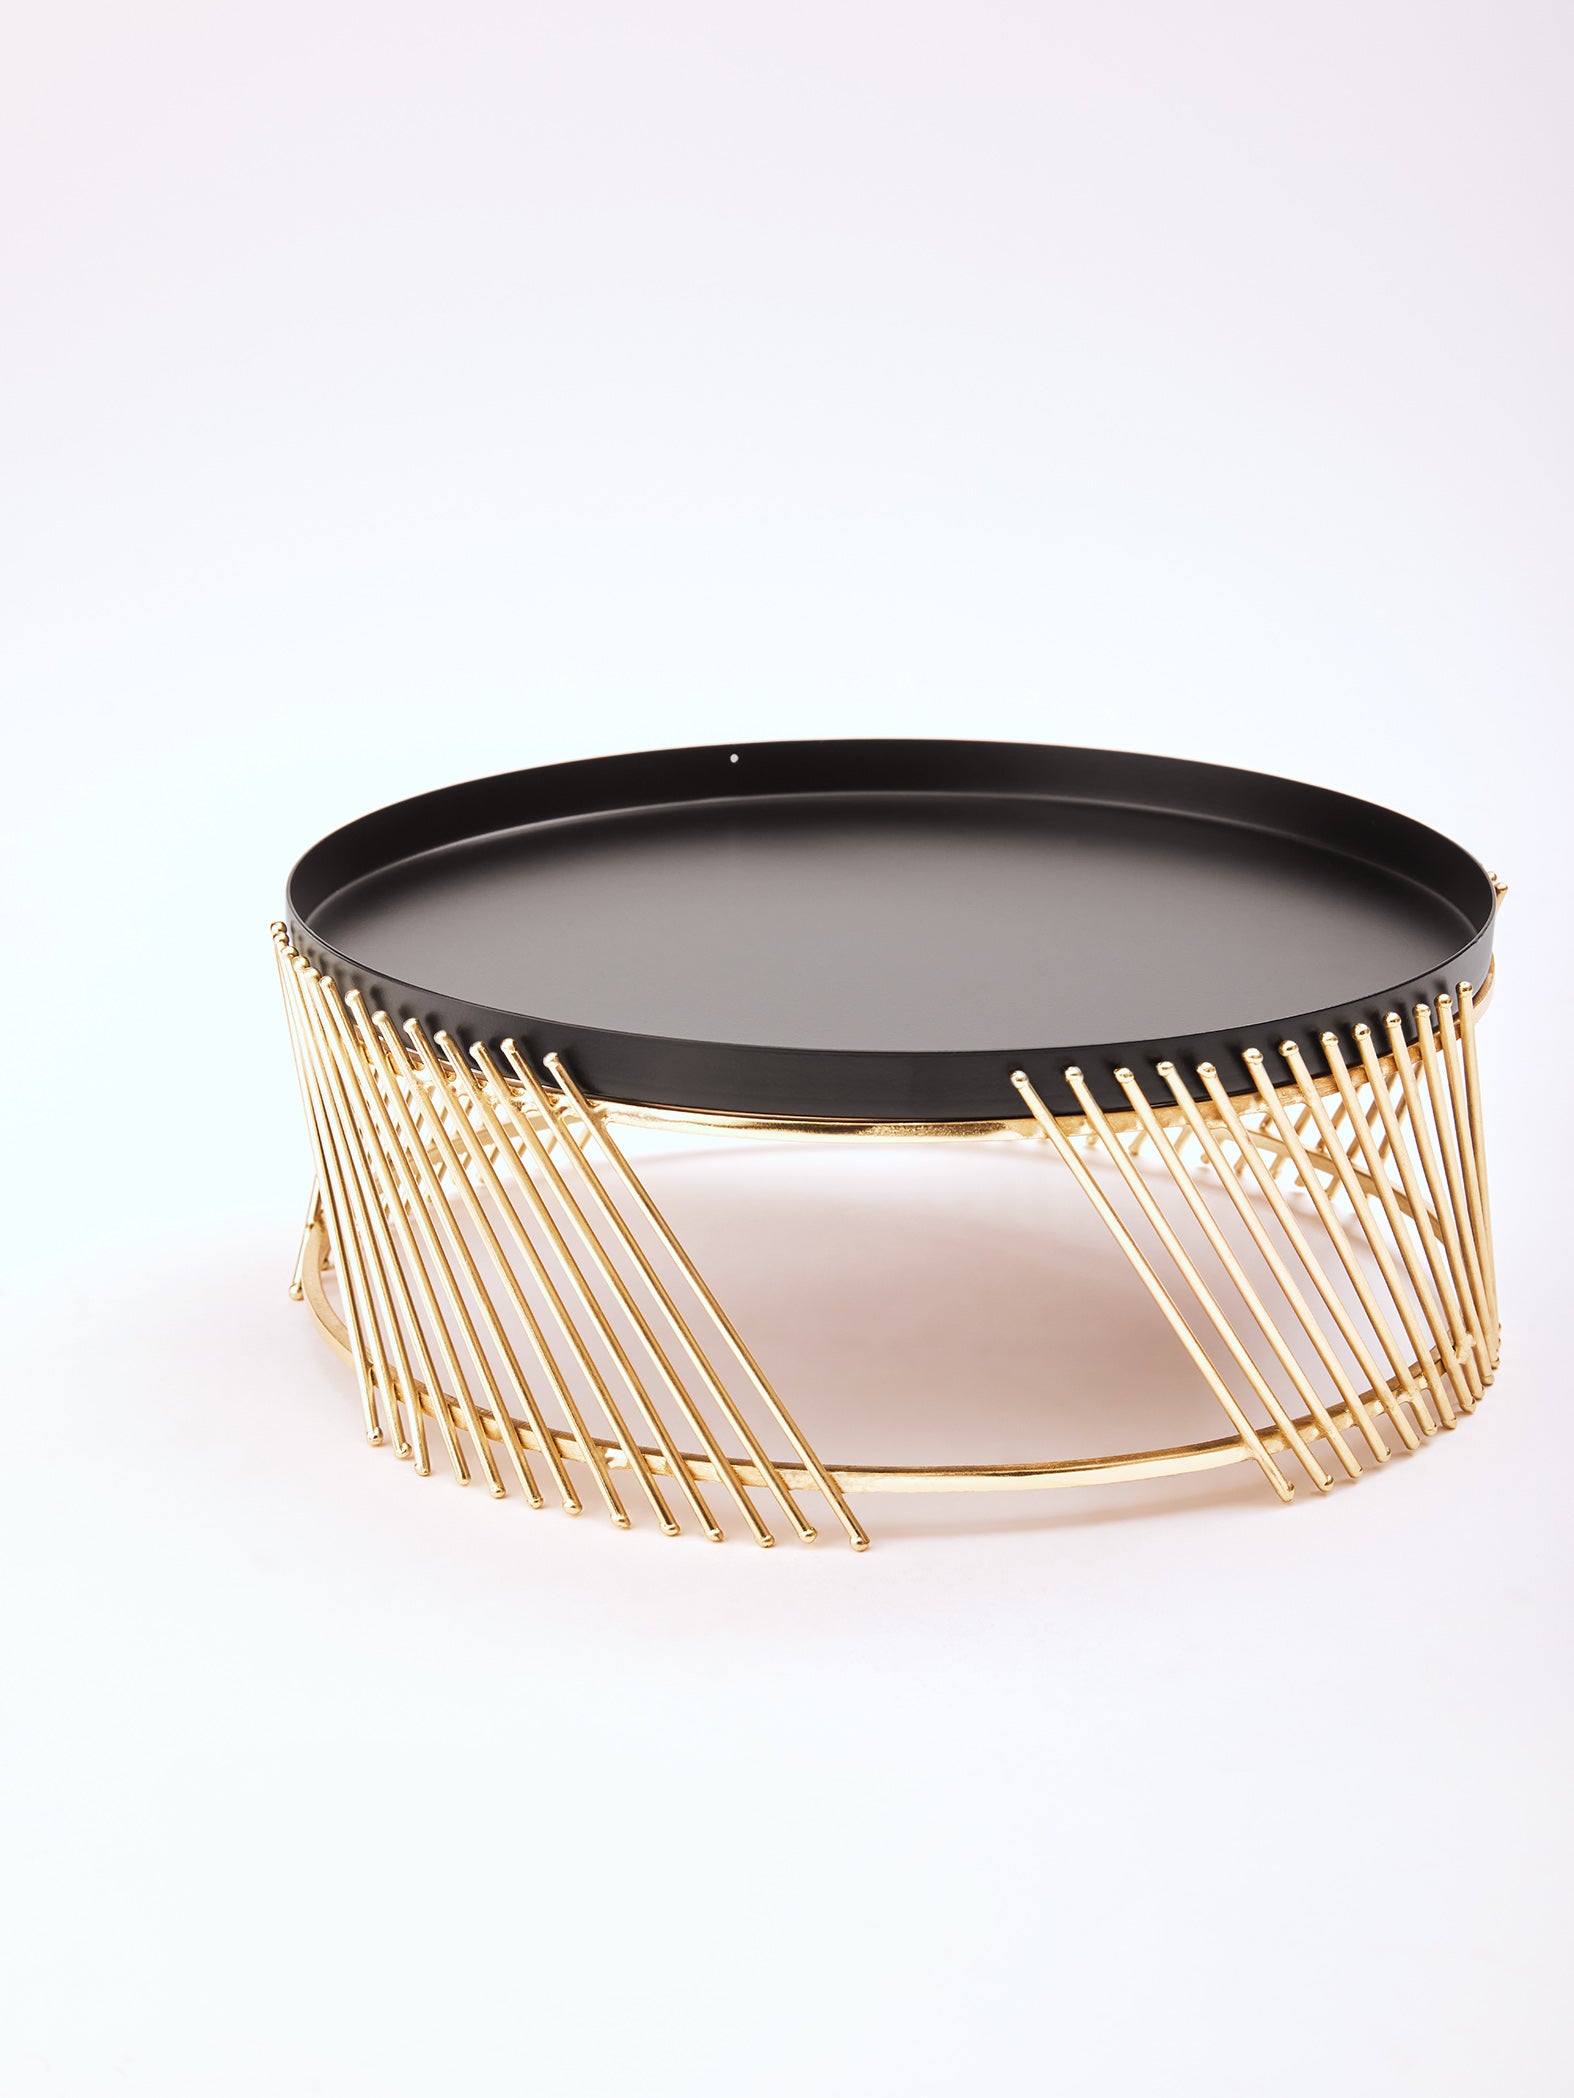 Black & Gold Cake Stand Large